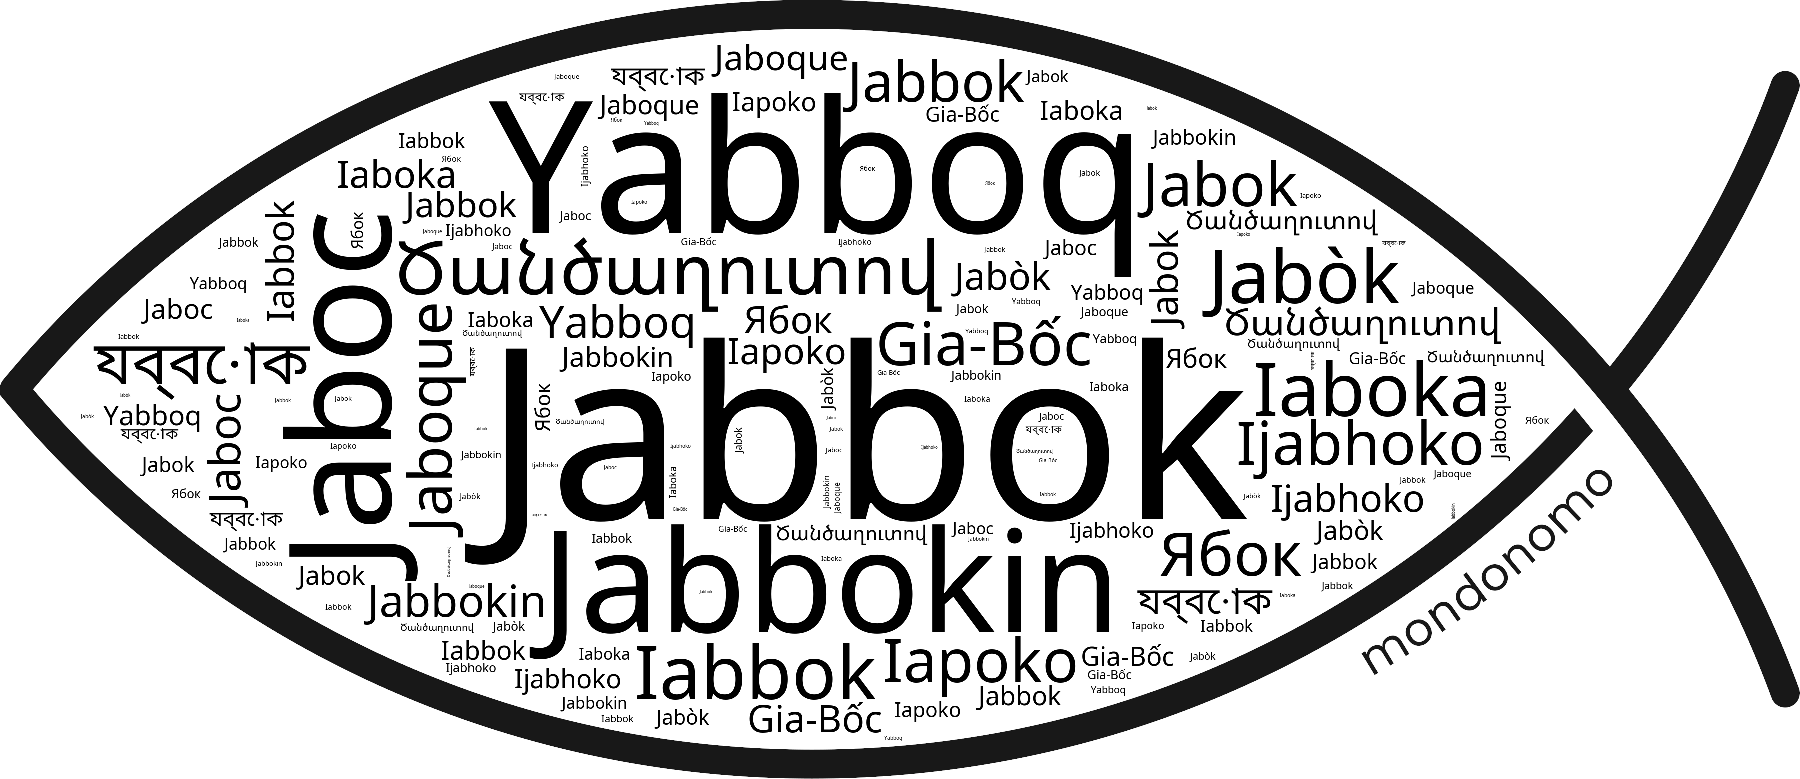 Name Jabbok in the world's Bibles